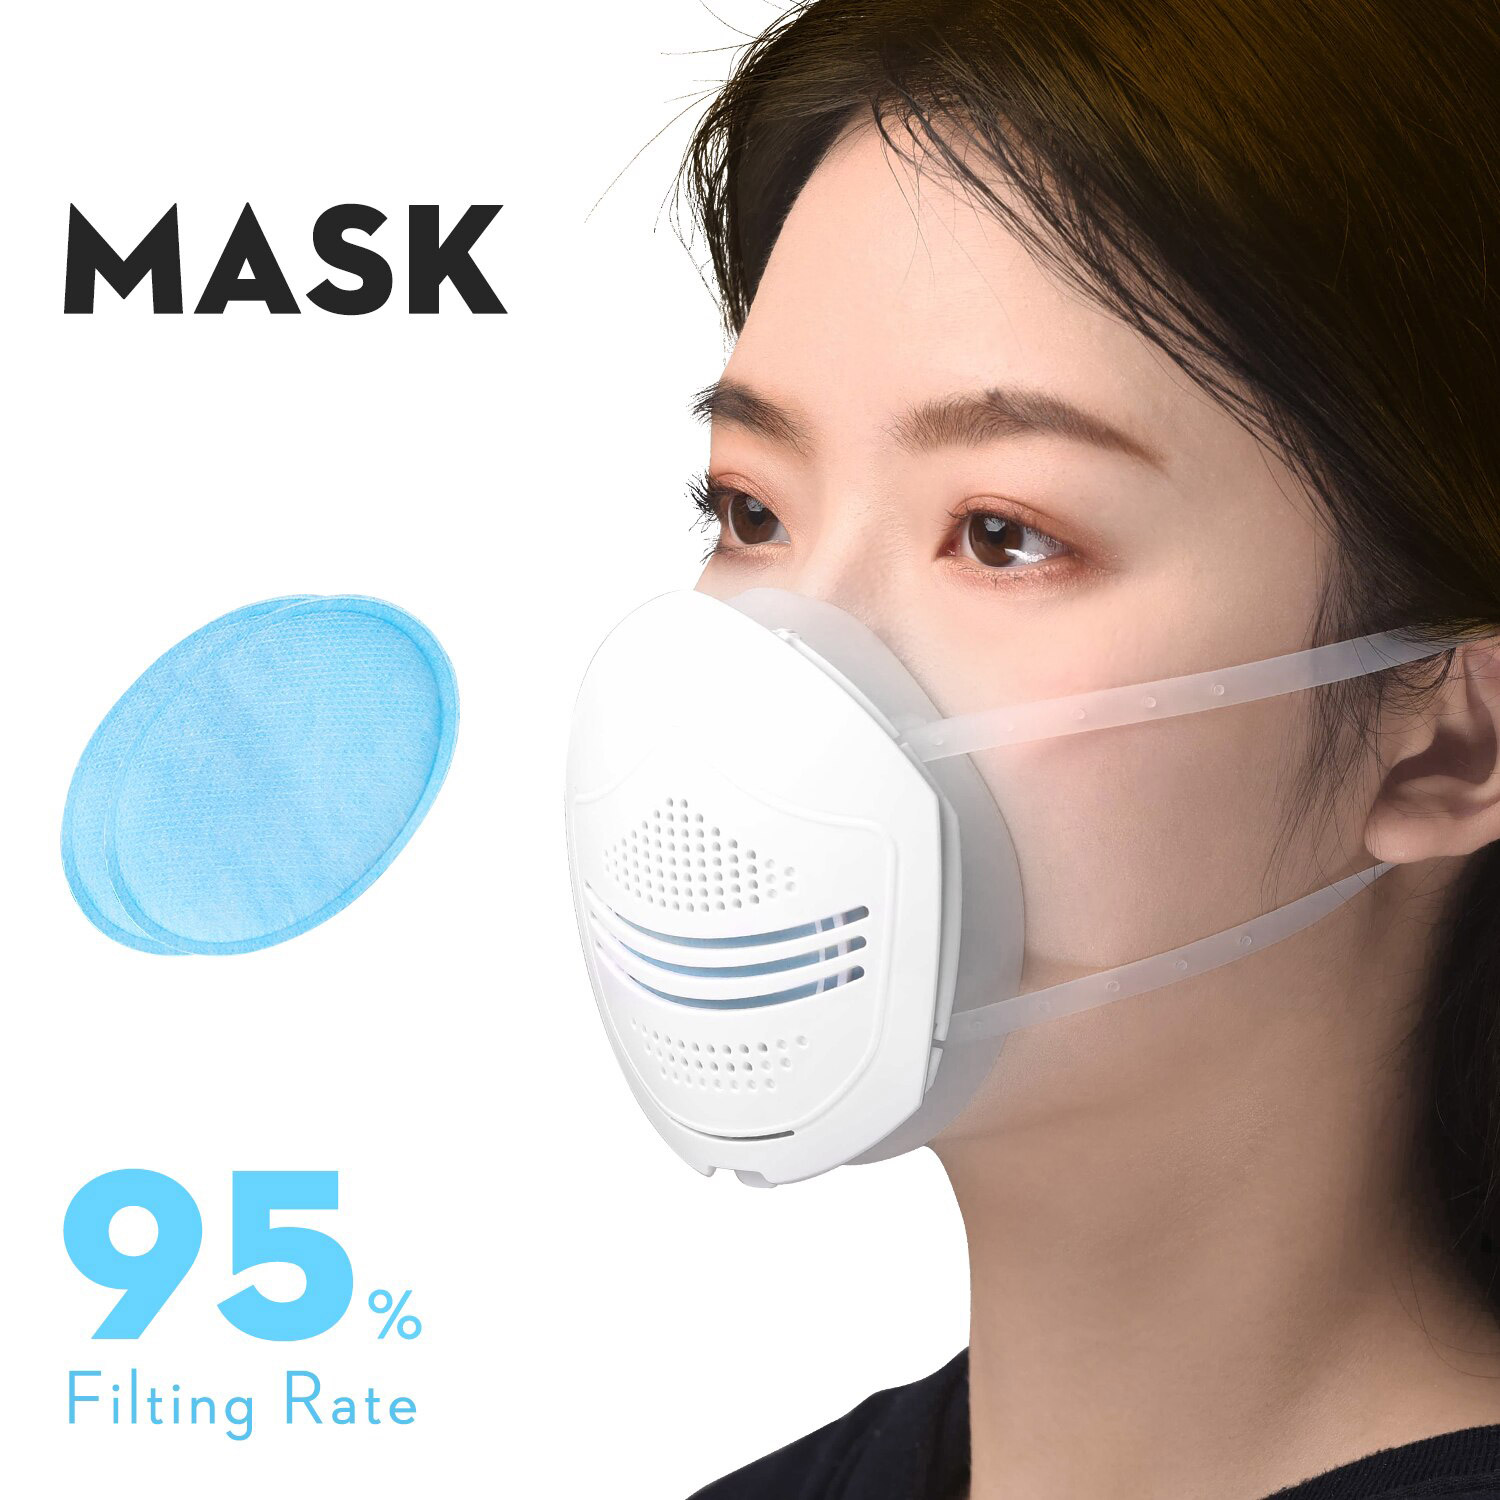 

Reusable Washable Multi-Function Air Filter Mask Filtration Efficiency 95% With 30pcs Replaceable Filter Element For Anti-Pollution Dust Allergy Haze - White